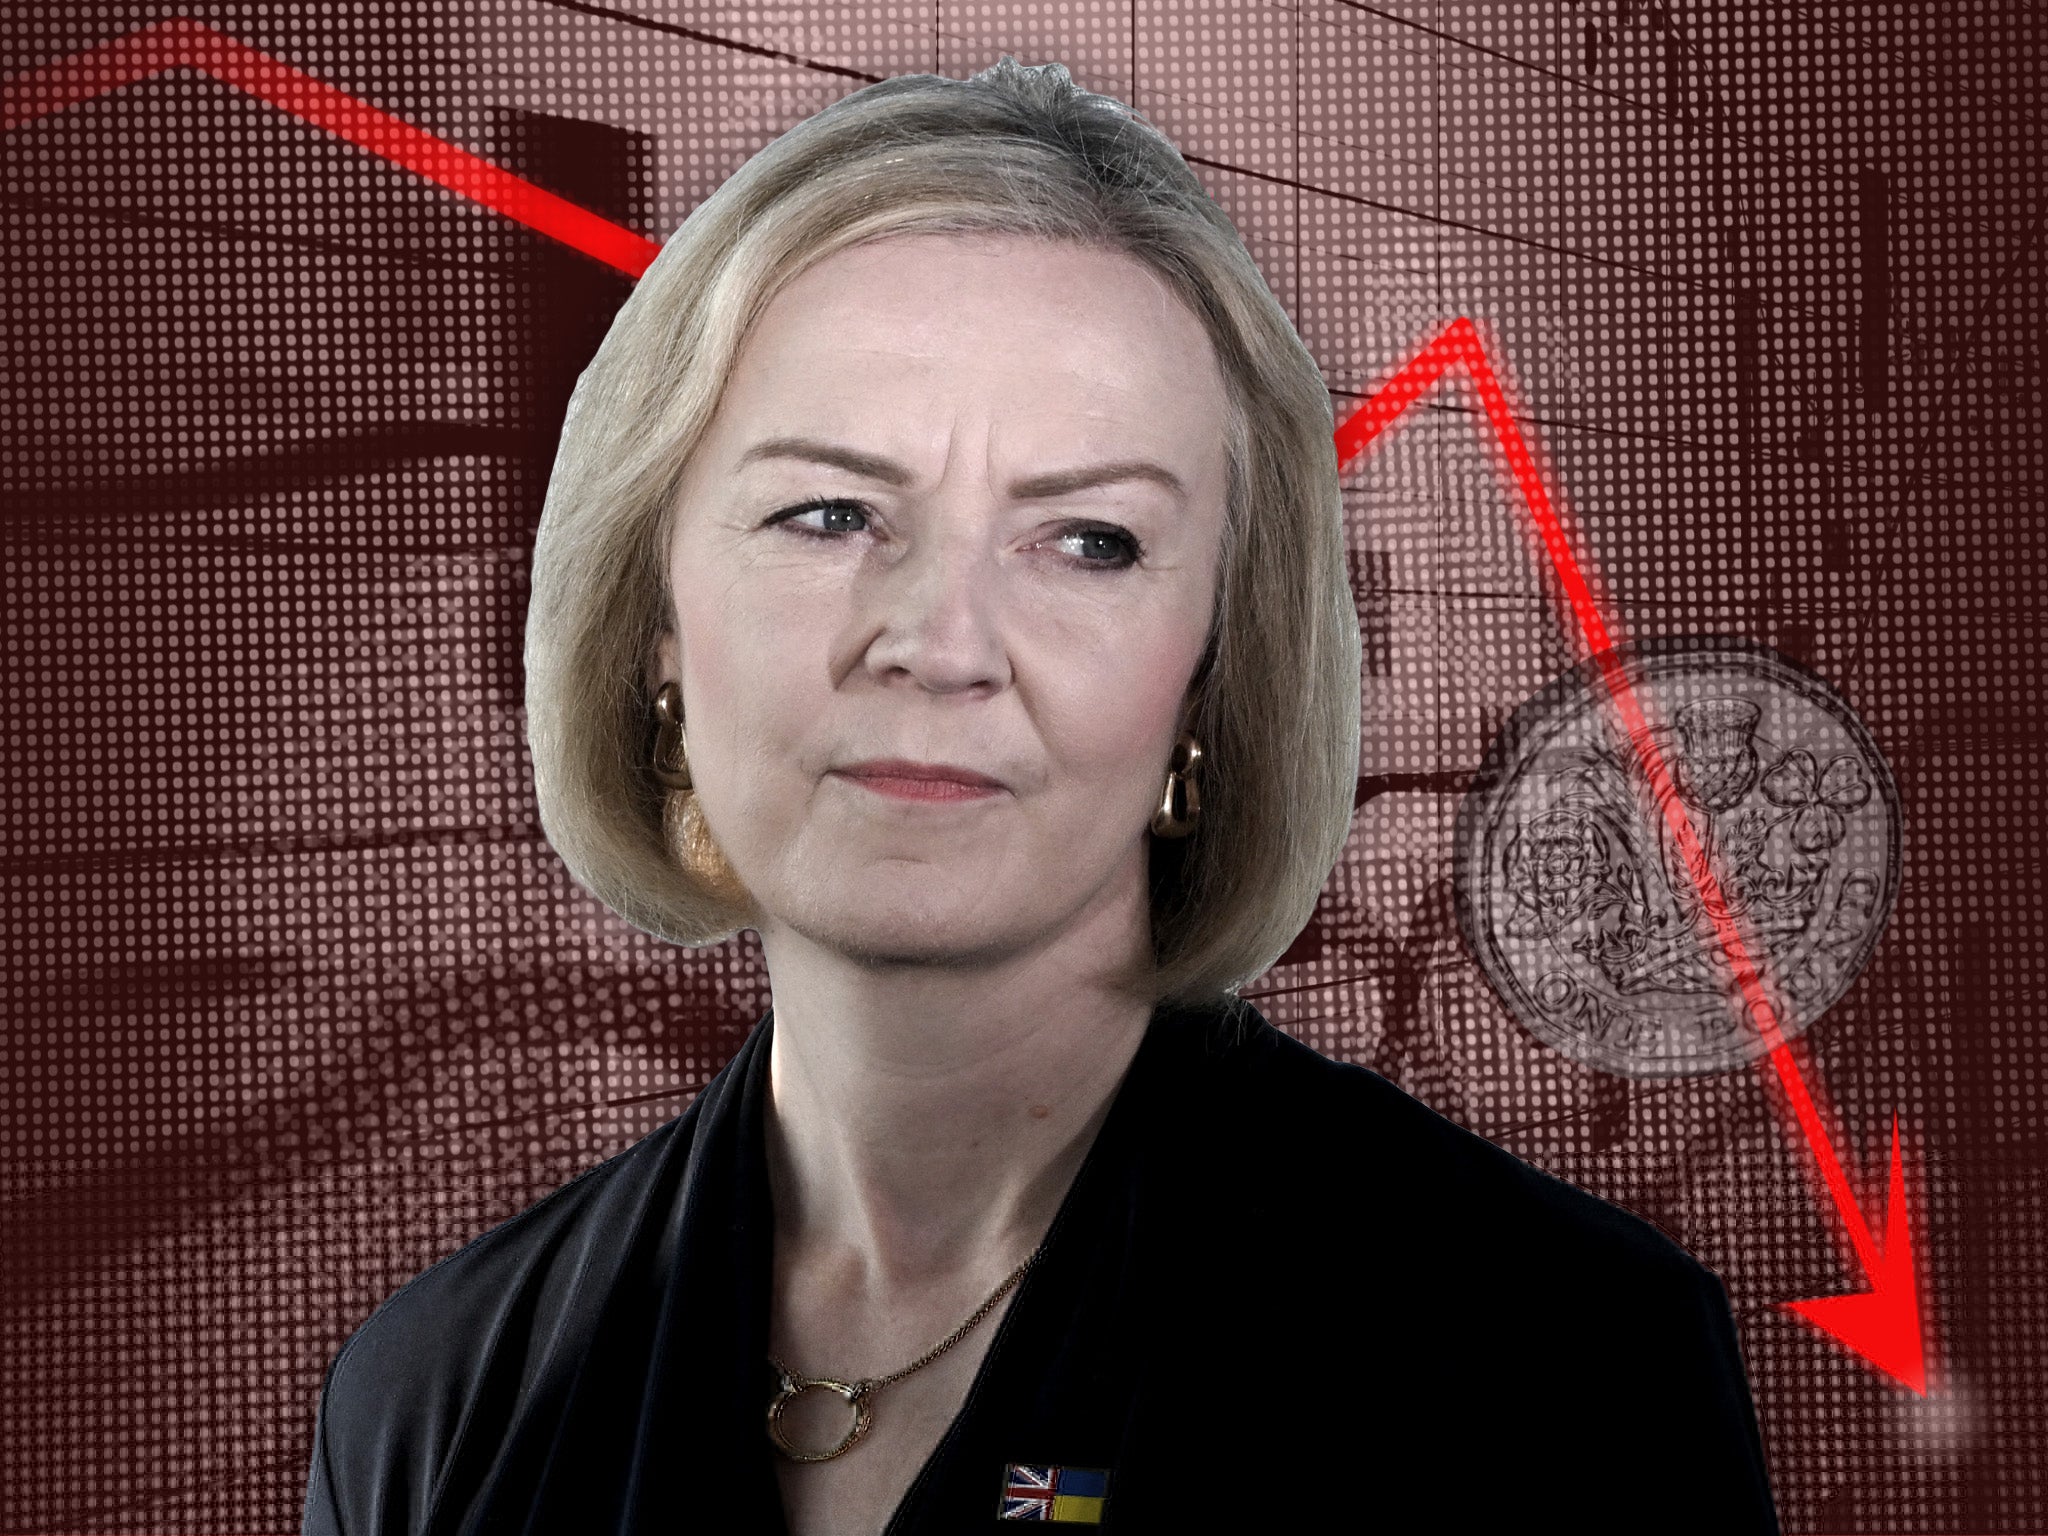 That sinking feeling: the City spoke of Britain paying a ‘moron premium’ for the craziness caused by Liz Truss,